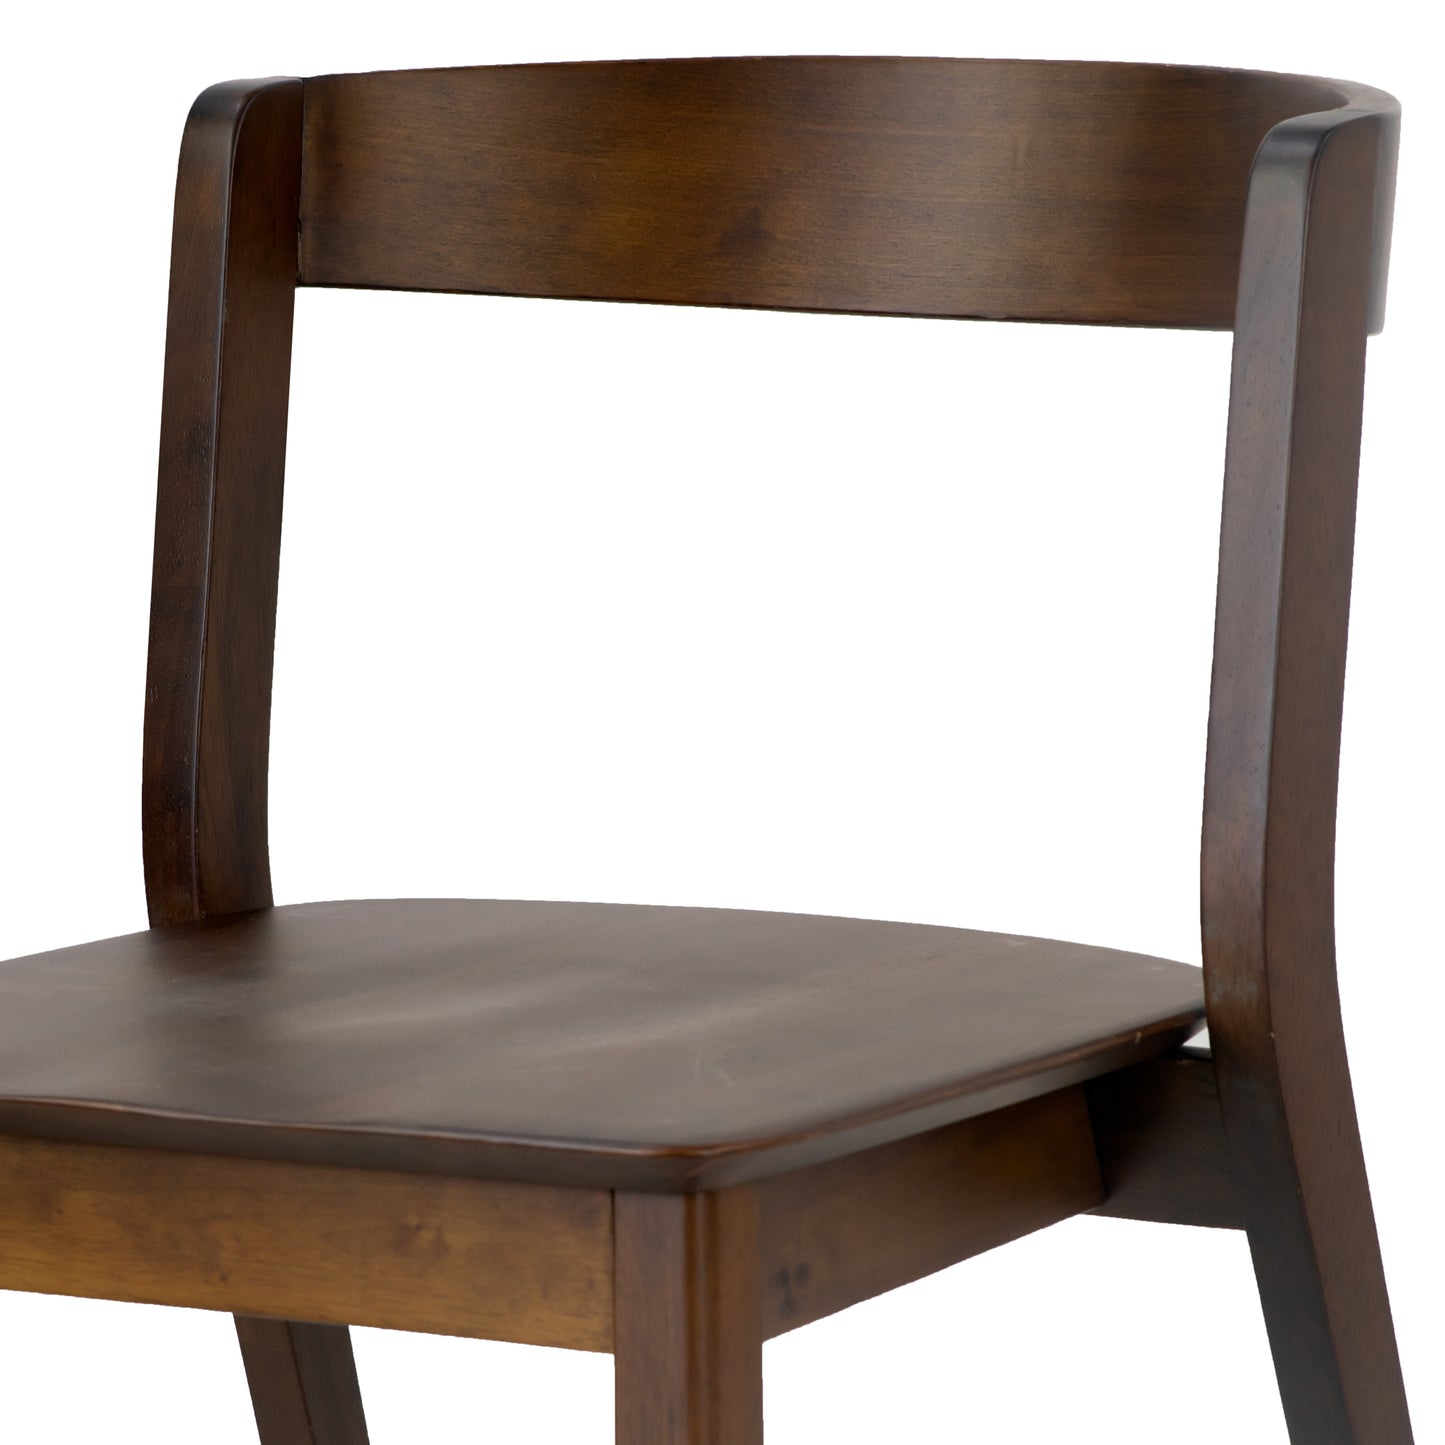 Set of 2 Astor Dark Brown Solid Wood Chair with Curved Back